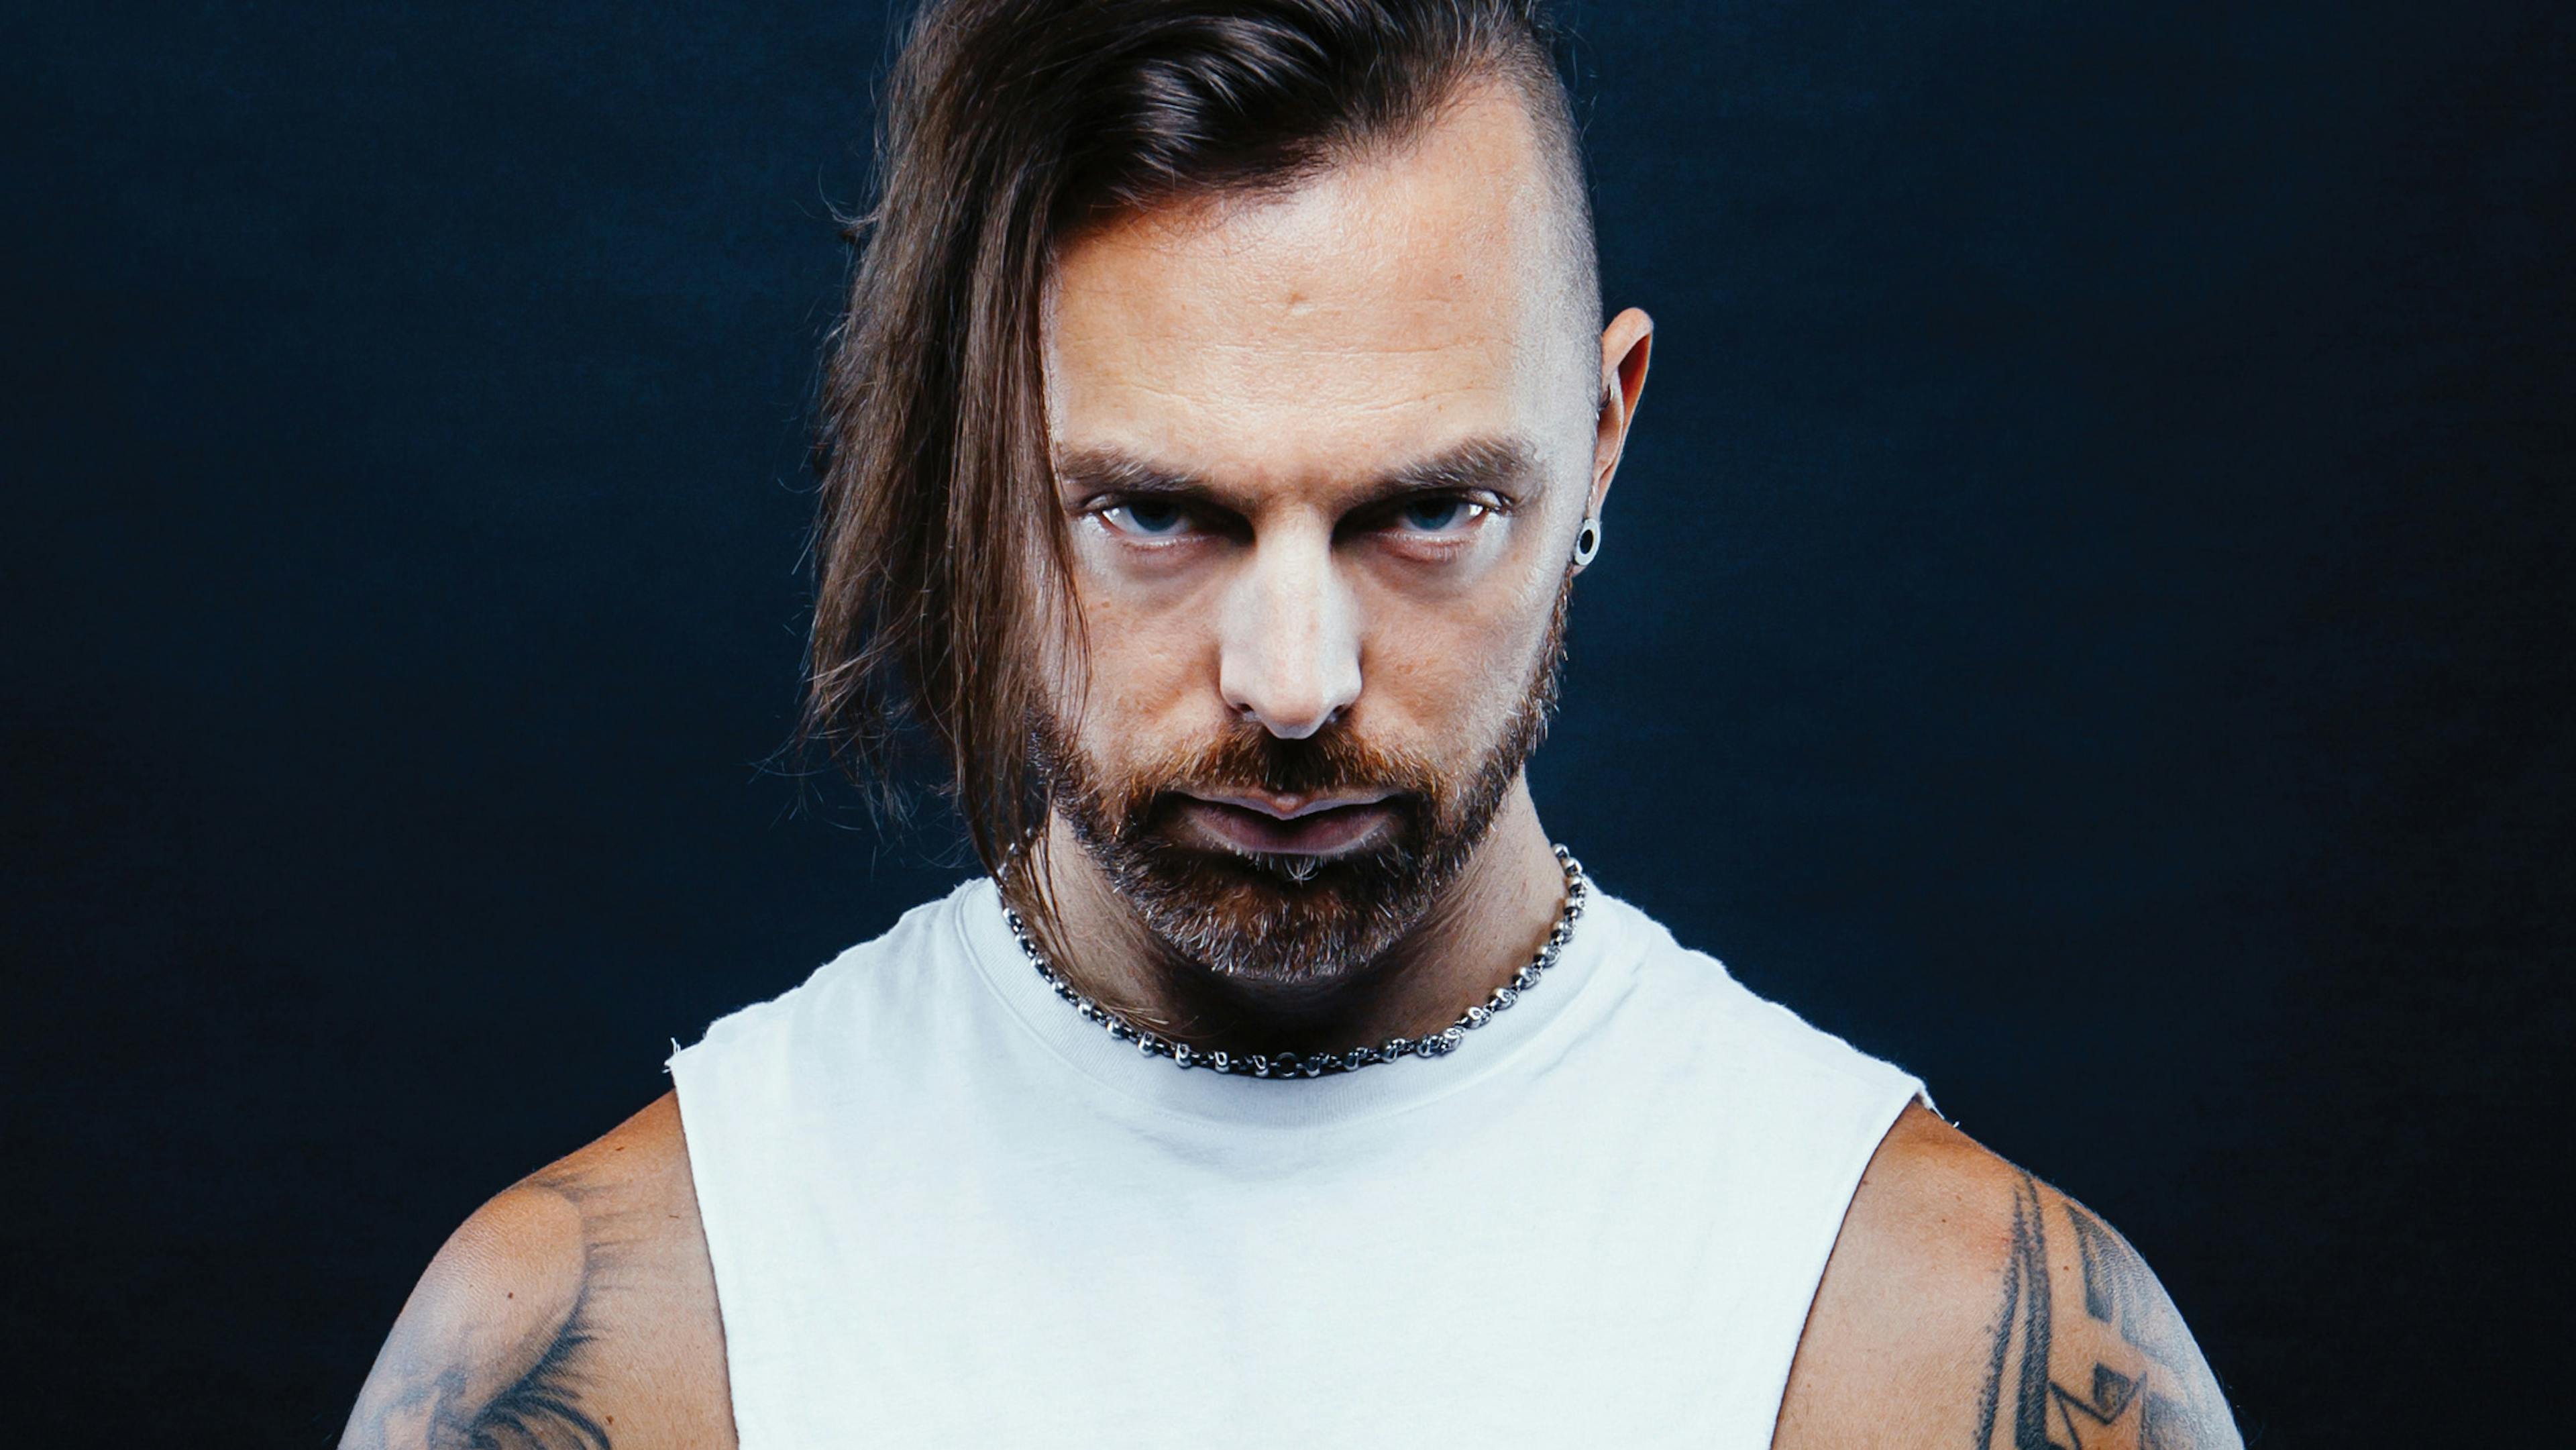 7 things you probably didn’t know about Bullet For My Valentine’s Matt Tuck